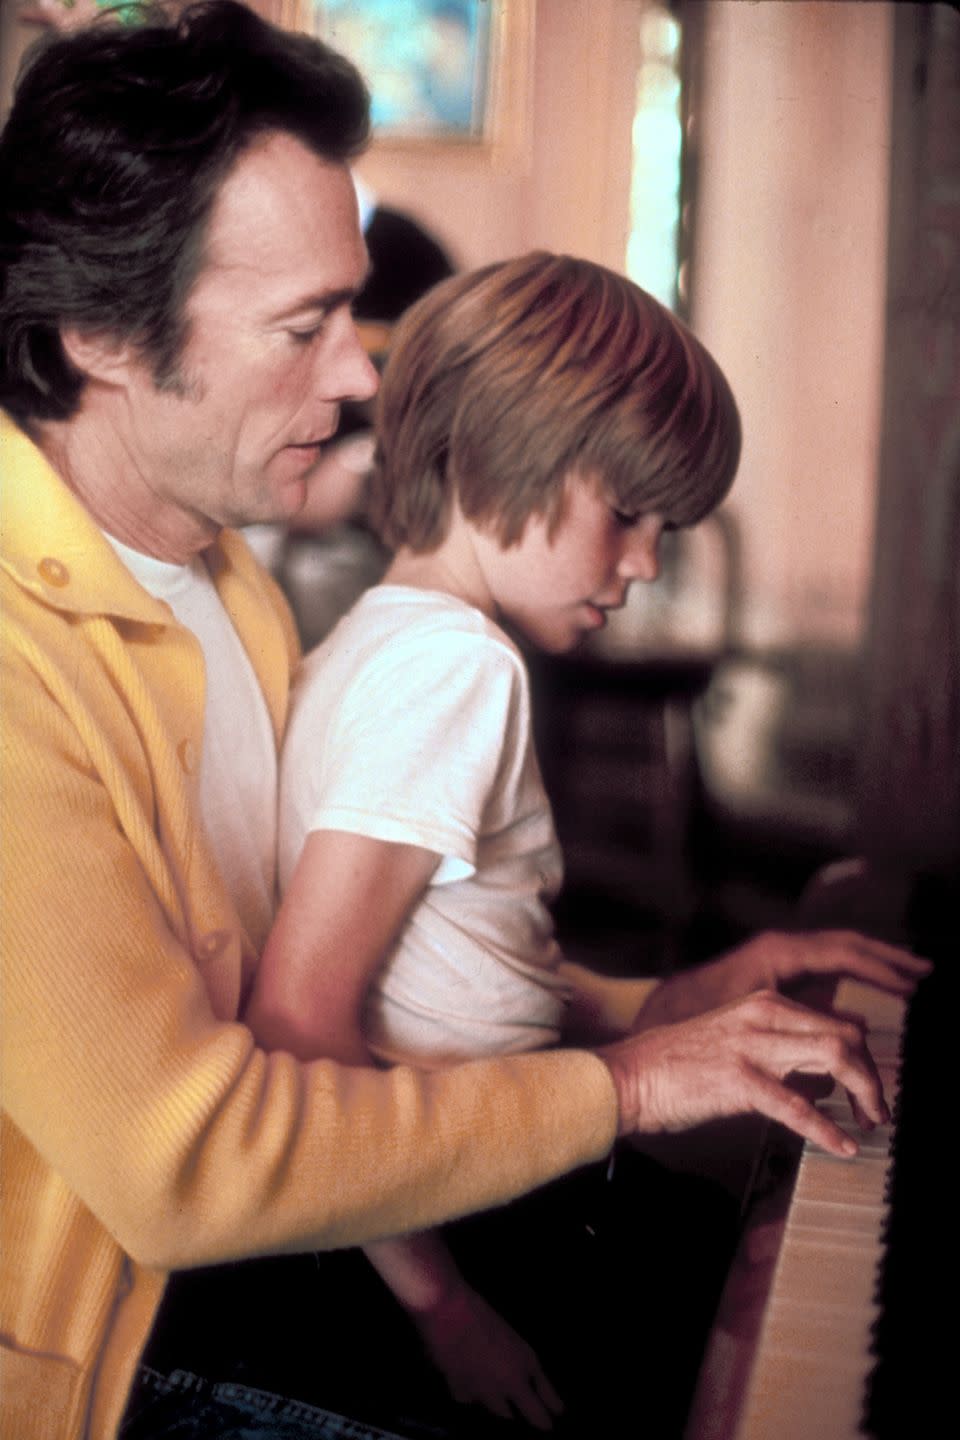 clint eastwood plays piano while kyle eastwood sits on his lap